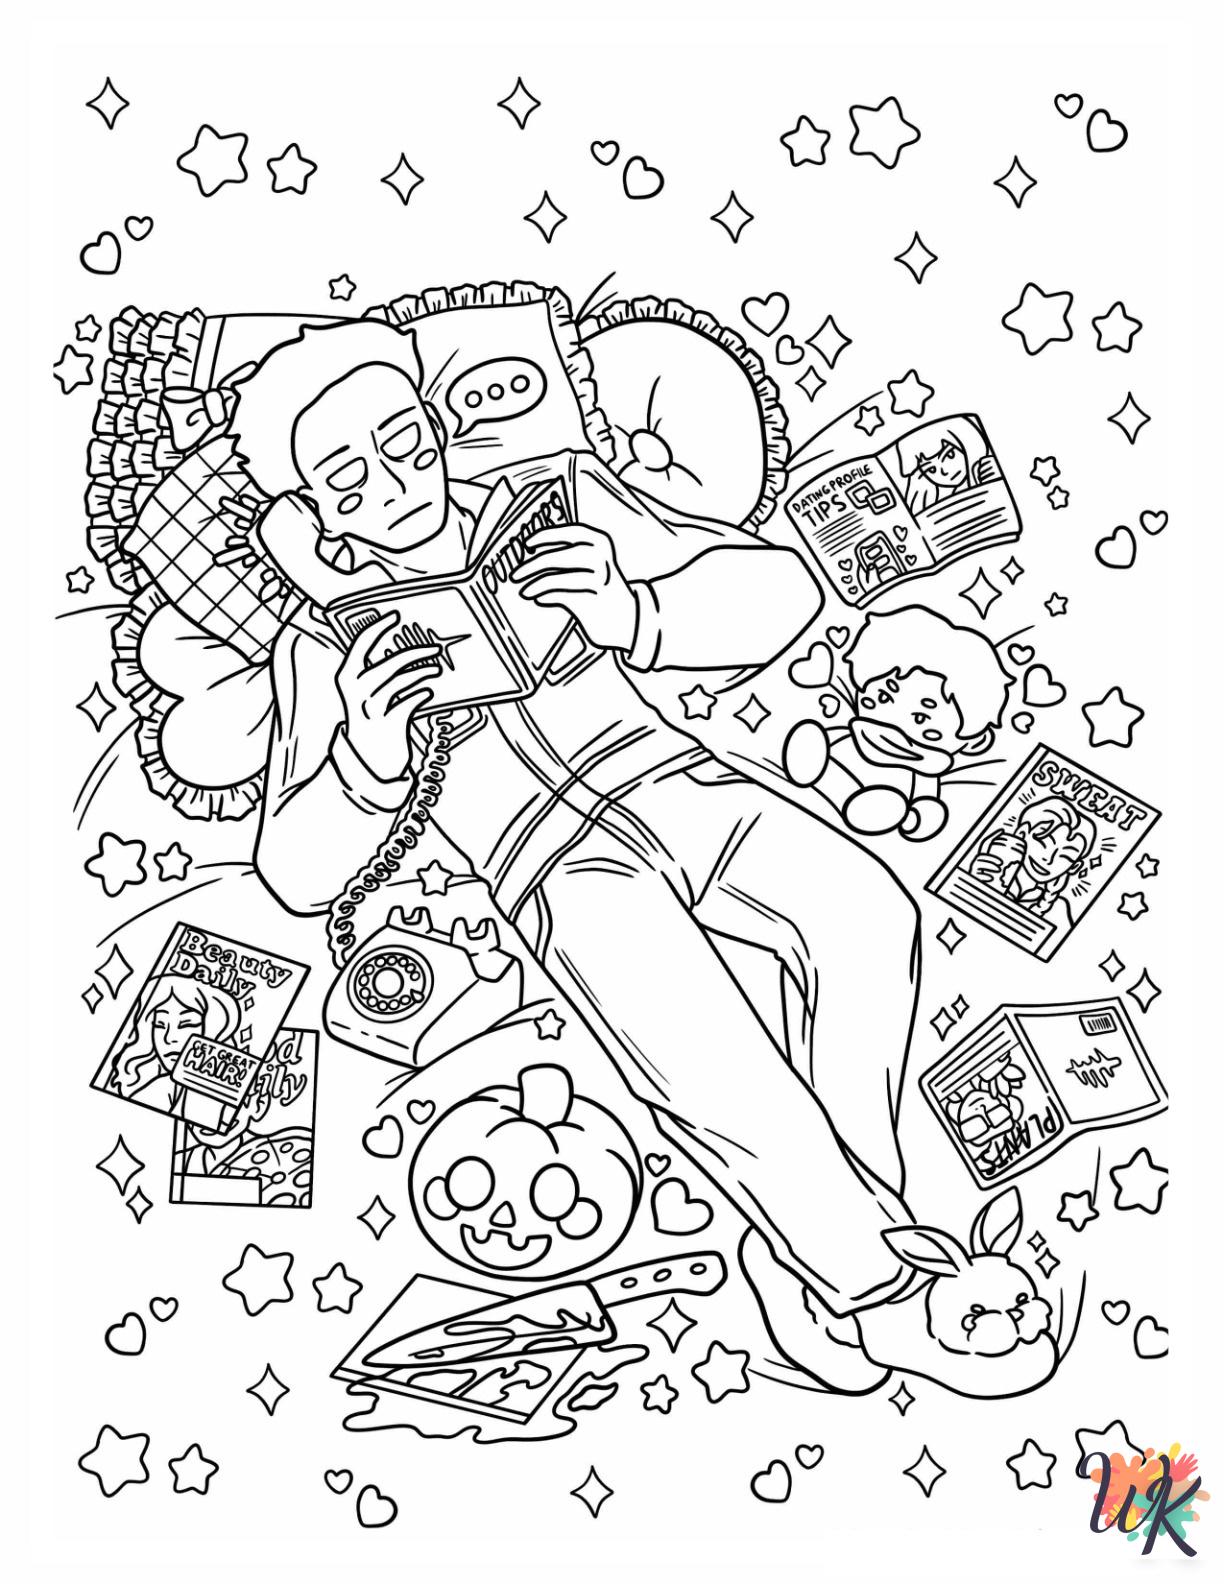 Aesthetic ornament coloring pages 1